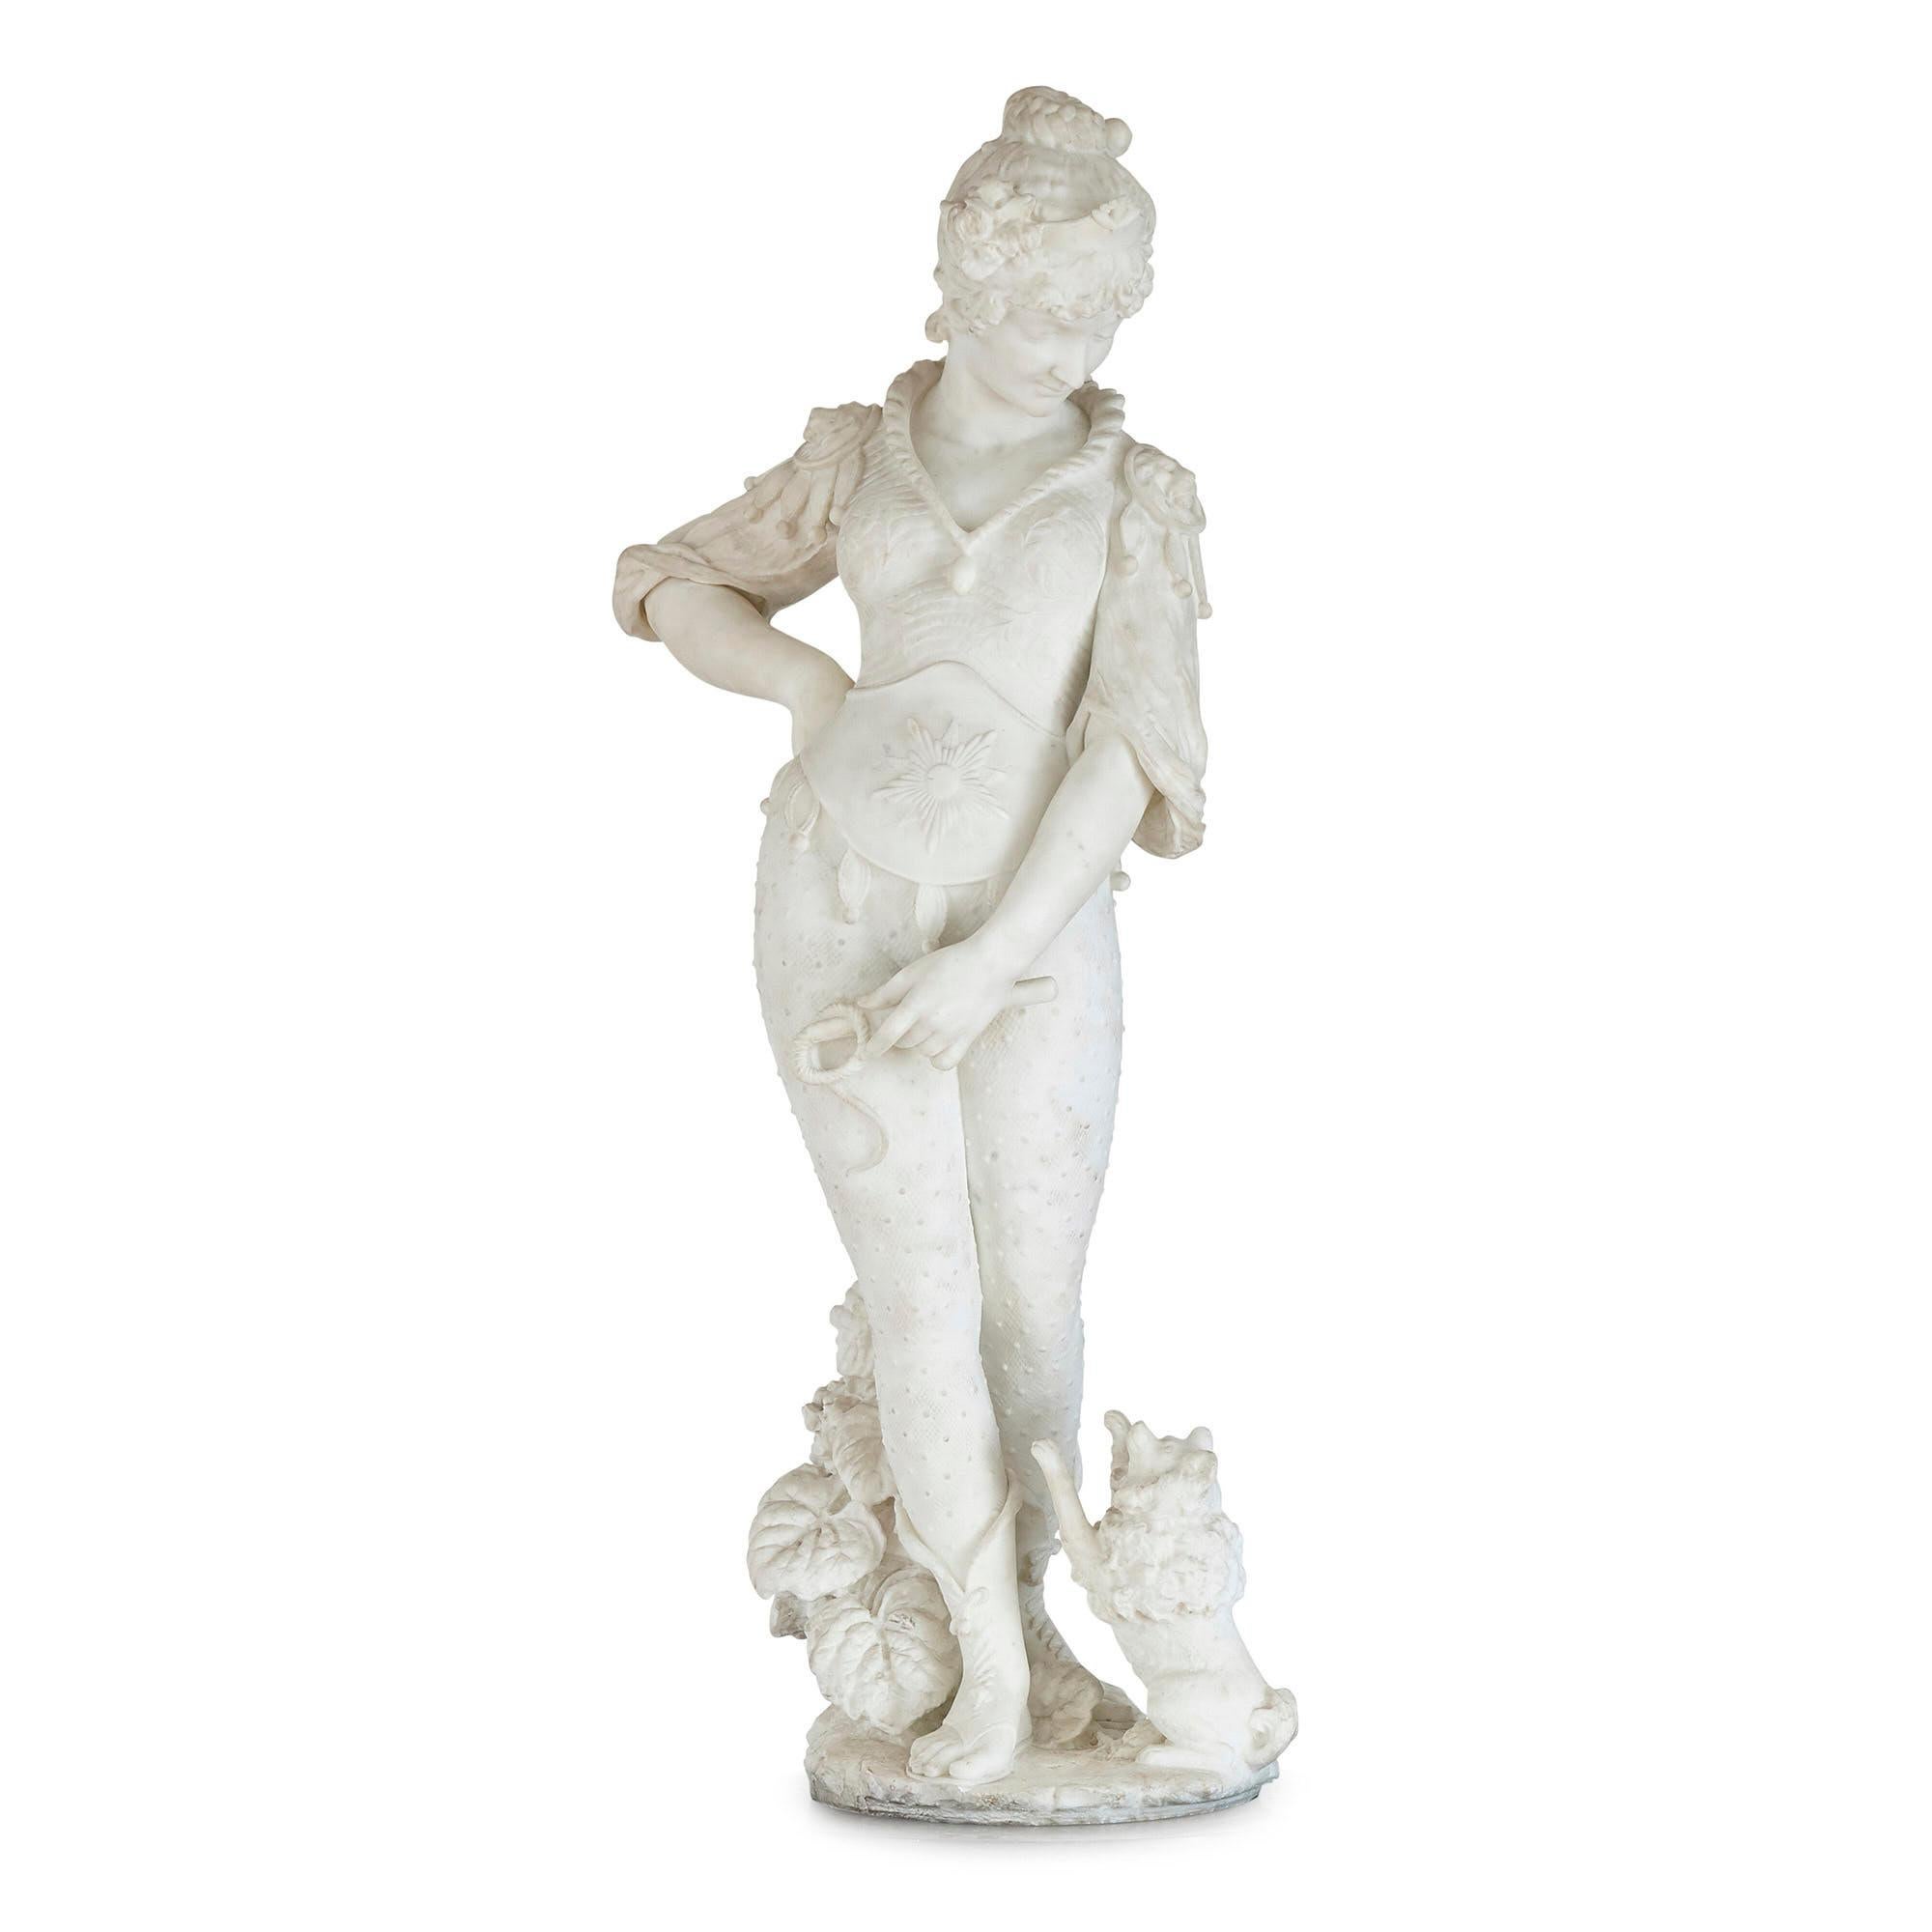 Large marble sculpture of a circus ringmistress by Antonio Natali
Italian, late 19th century
Figure: Height 110cm, width 46cm, depth 33cm
Pedestal: Height 98cm, diameter 50cm
Total: Height 208cm, diameter 50cm

This superb marble sculpture is